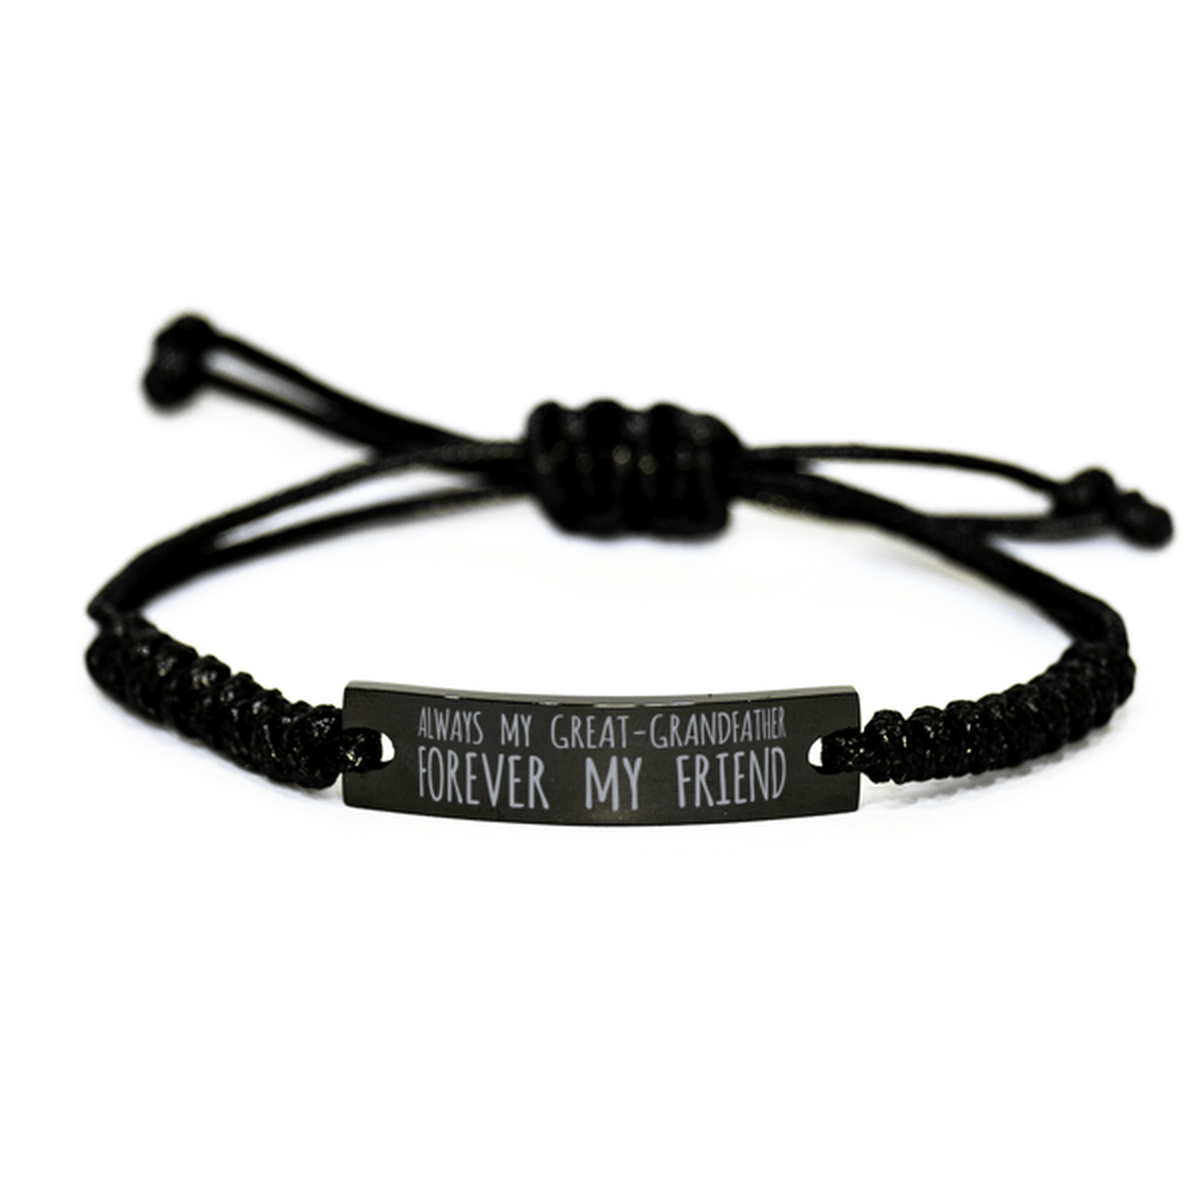 Inspirational Great Grandfather Black Rope Bracelet, Always My Great Grandfather Forever My Friend, Best Birthday Gifts For Family